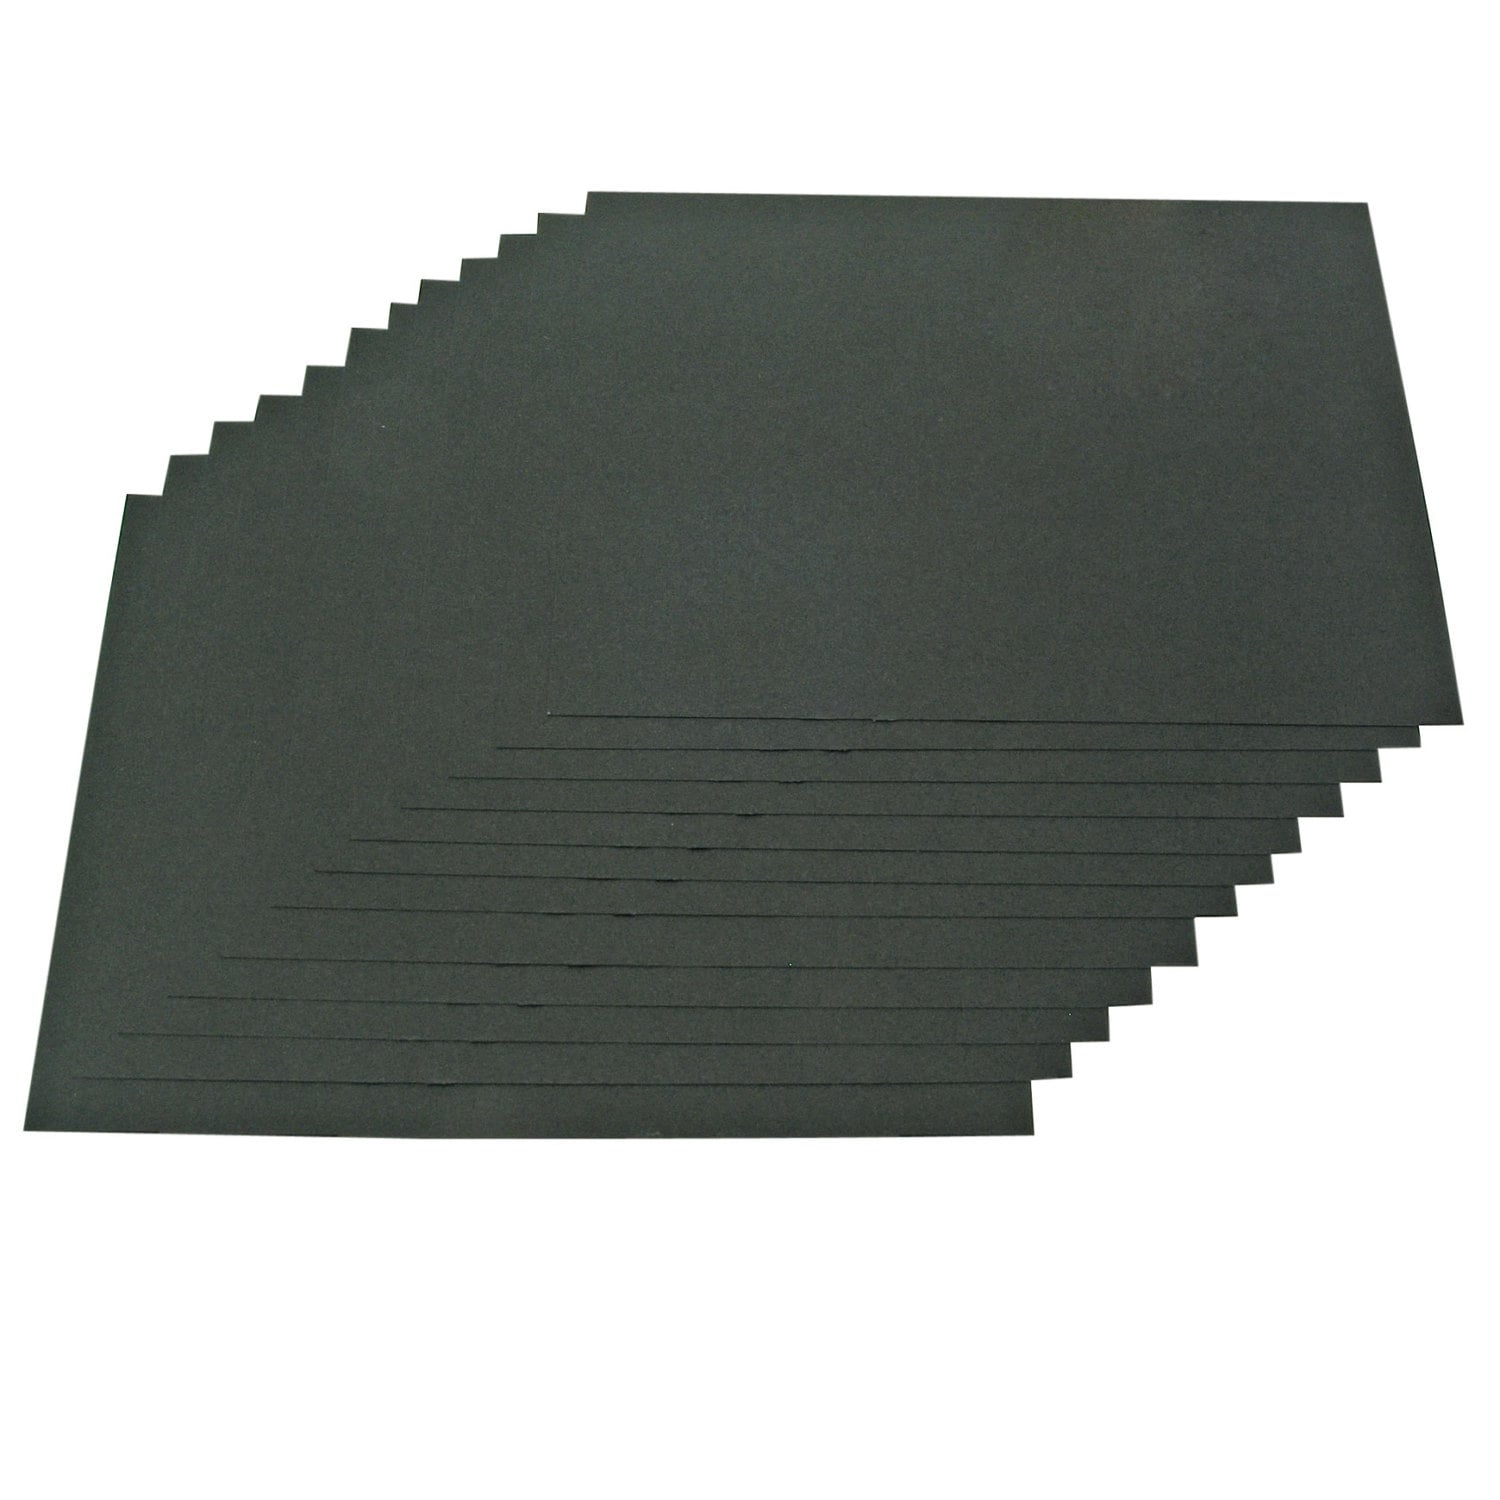 Recycled A3 Black Sugar Paper 100gsm Black Recycled Construction